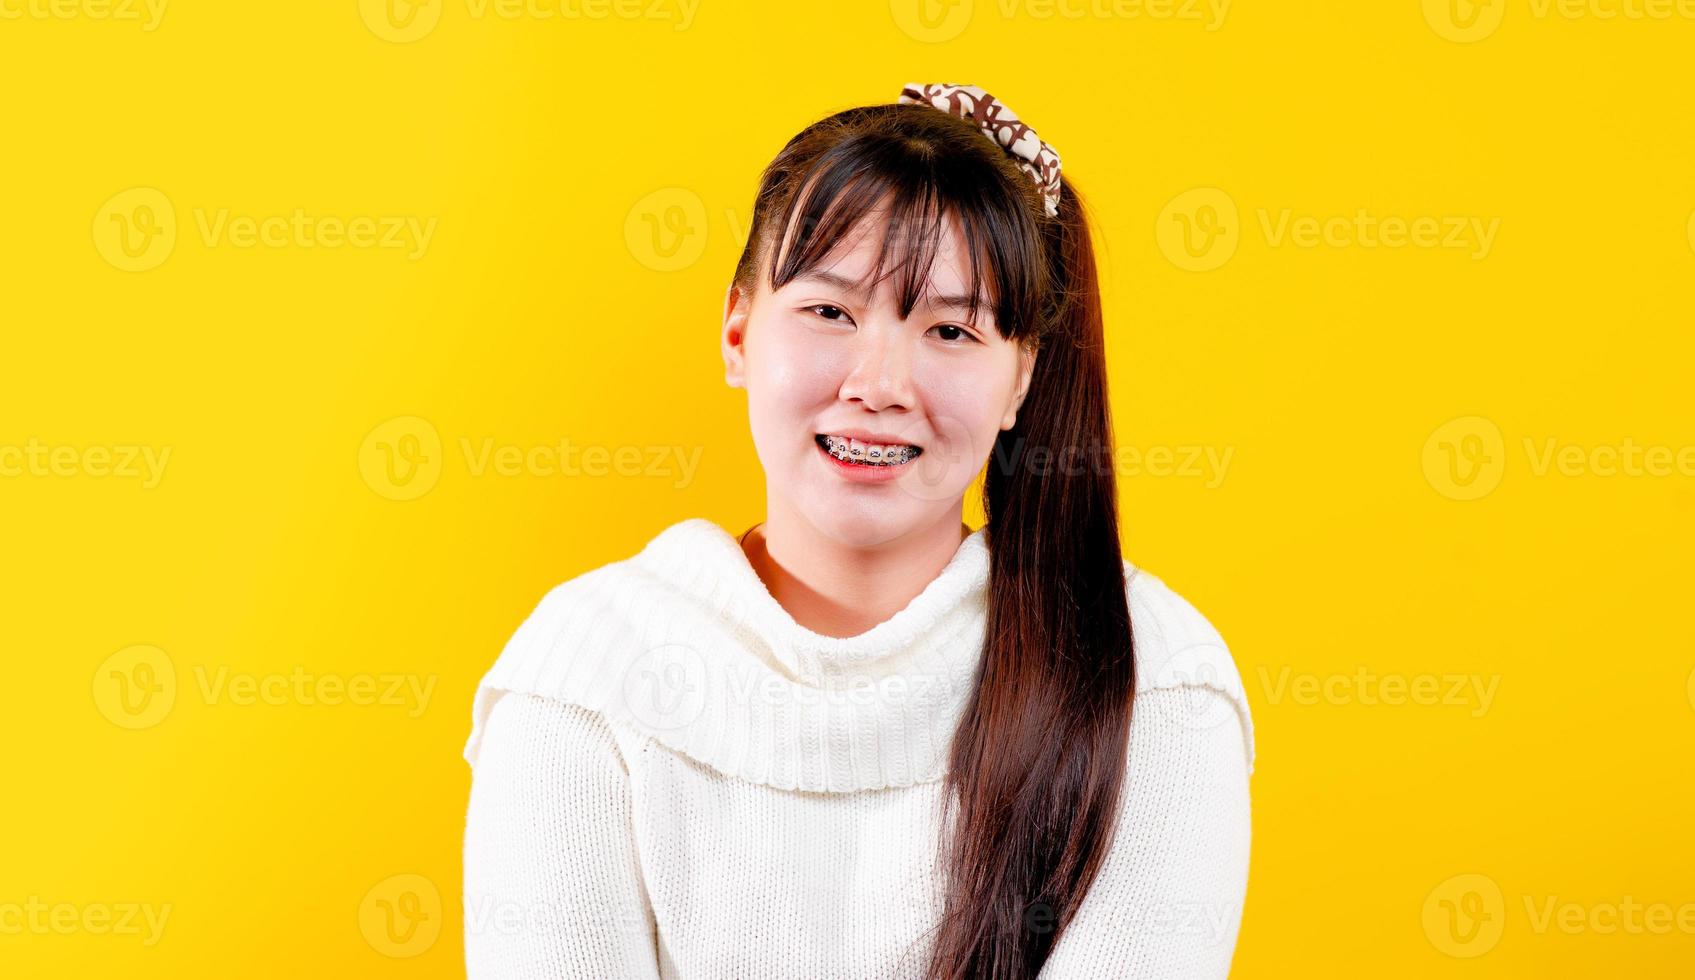 asian girl That cheerful, fun, bright smile. expression of loving eyes good living and happiness at work, relaxation, against a yellow background photo